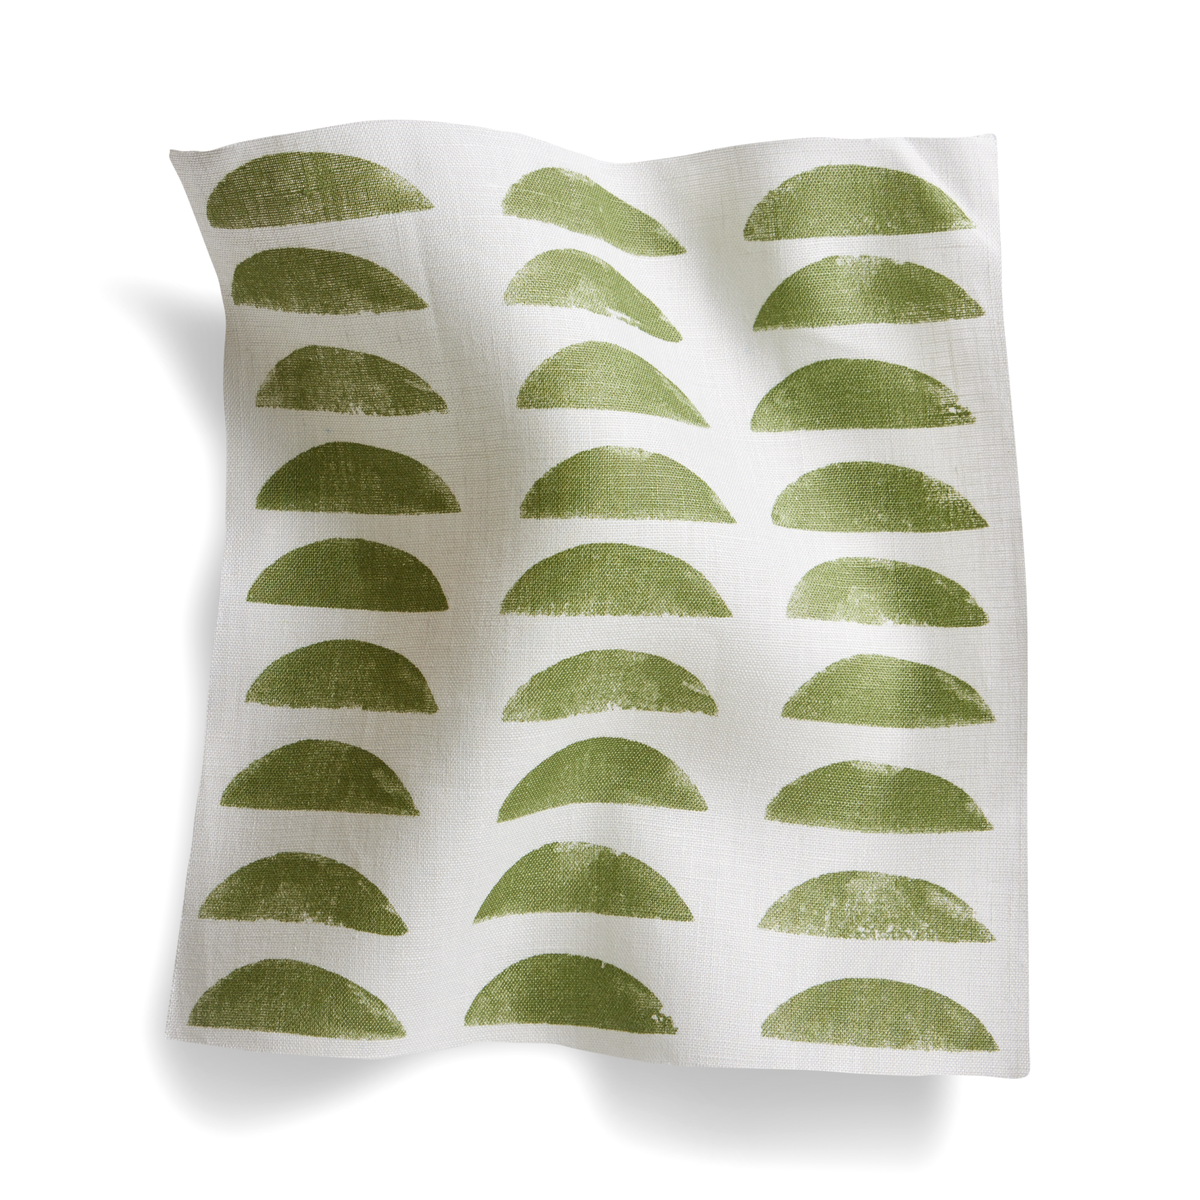 Hills Fabric in Green